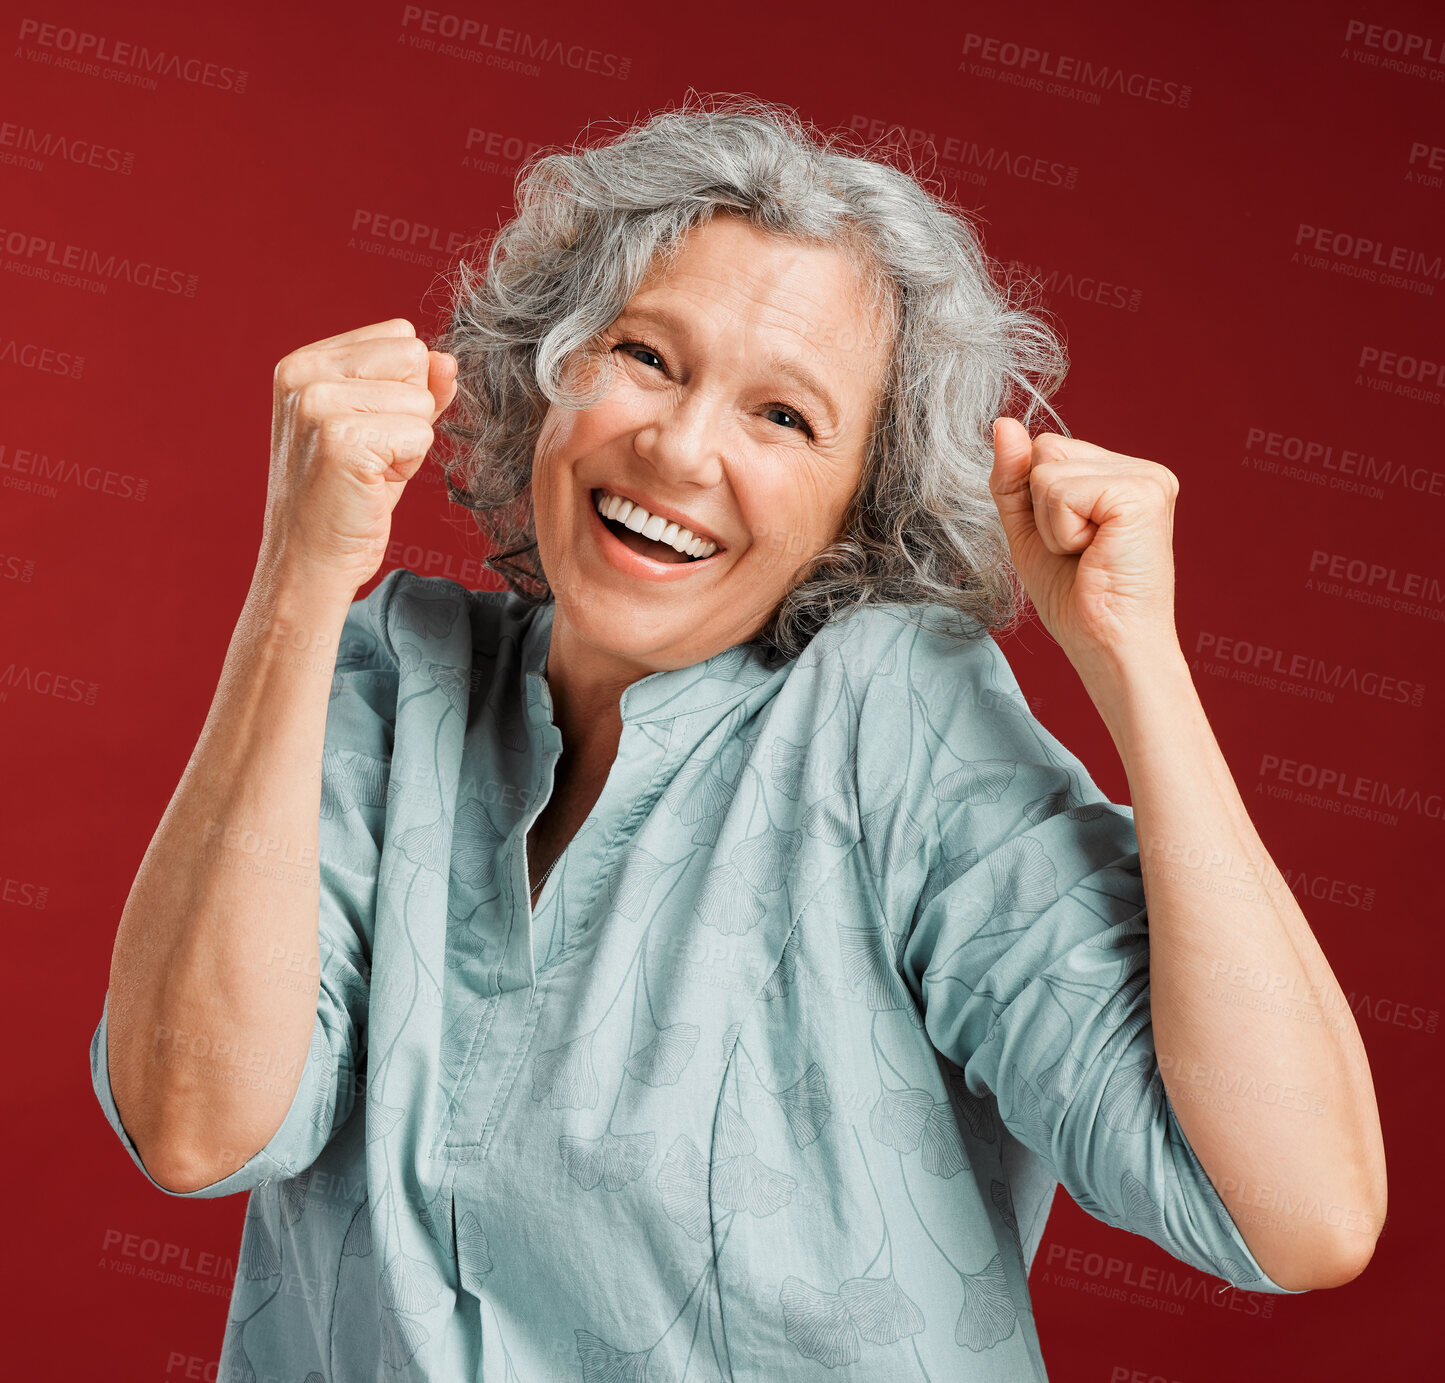 Buy stock photo Celebrating, cheering and winning with a happy, smiling and excited senior female posing in studio against a red background. Portrait of a cheerful, wow and positive mature female with a fist gesture